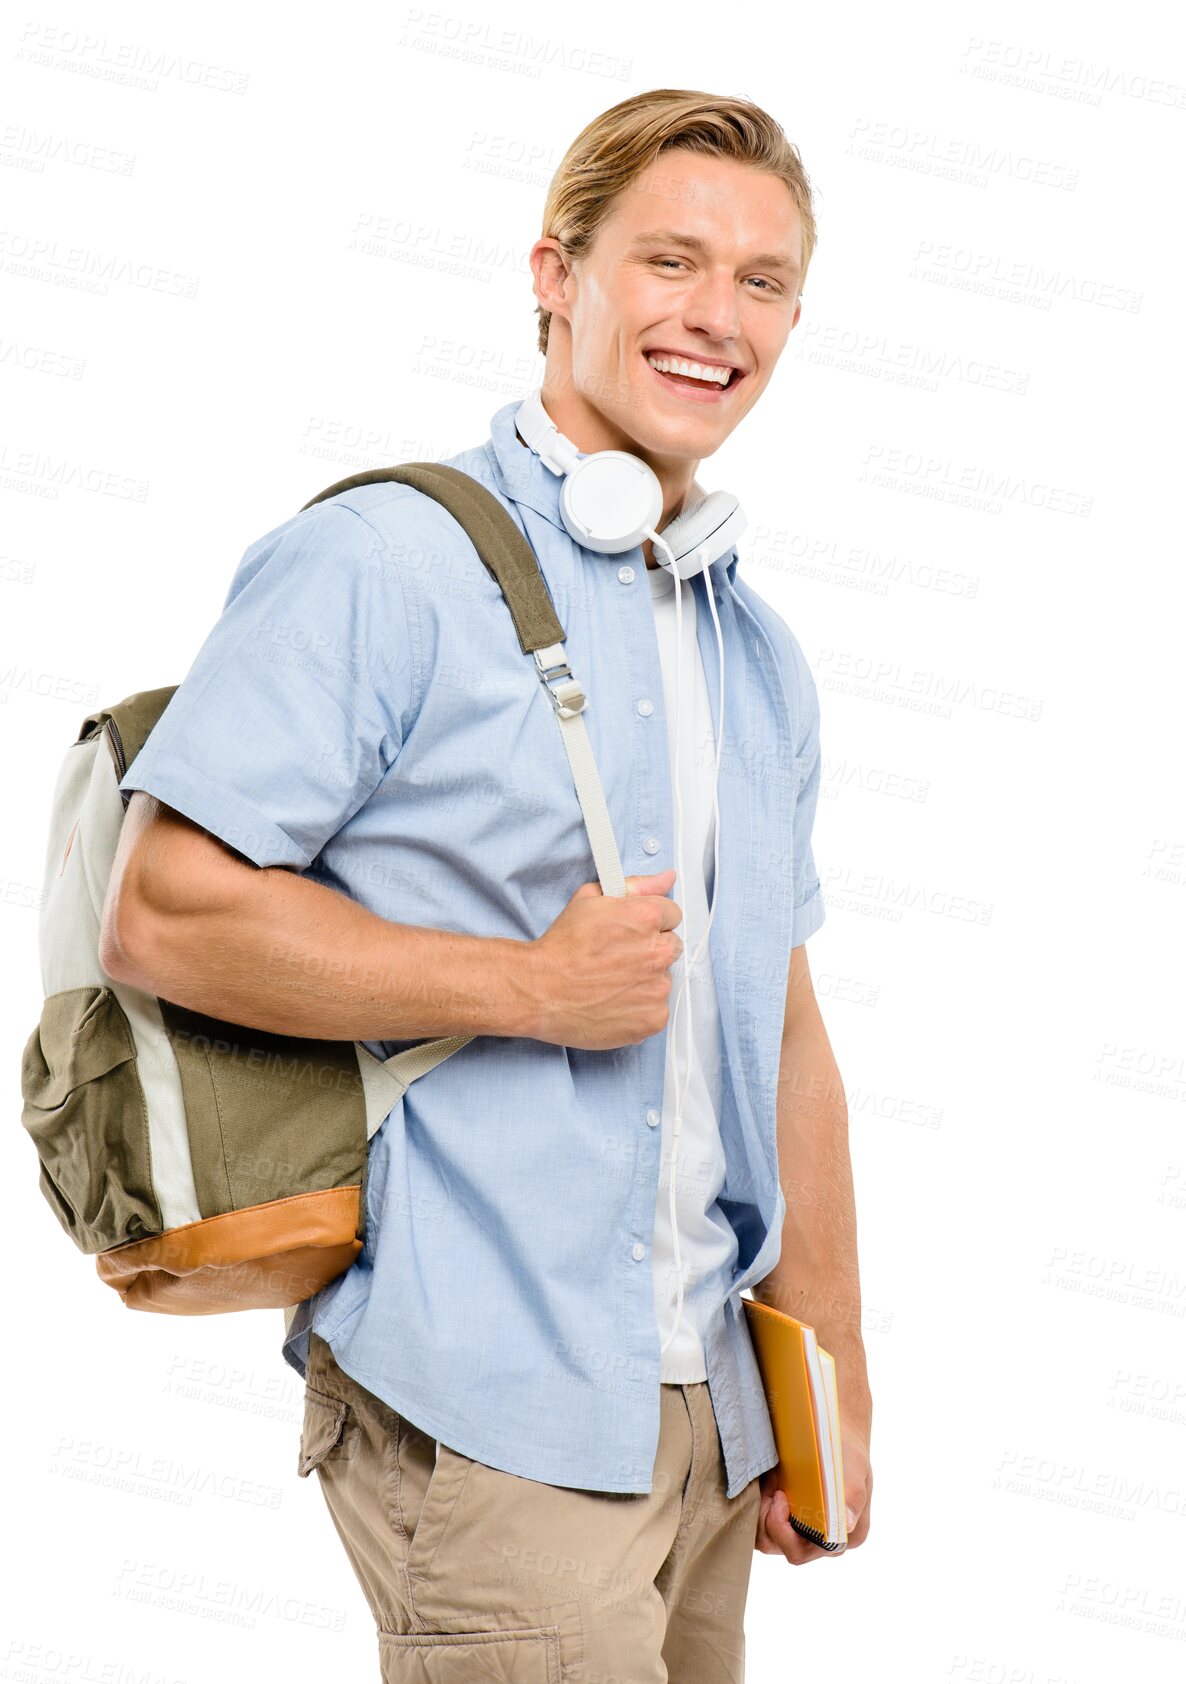 Buy stock photo Backpack, portrait and happy man or student in university, school and education, study or scholarship. Young person in college with notebook, bag and headphones isolated on transparent png background